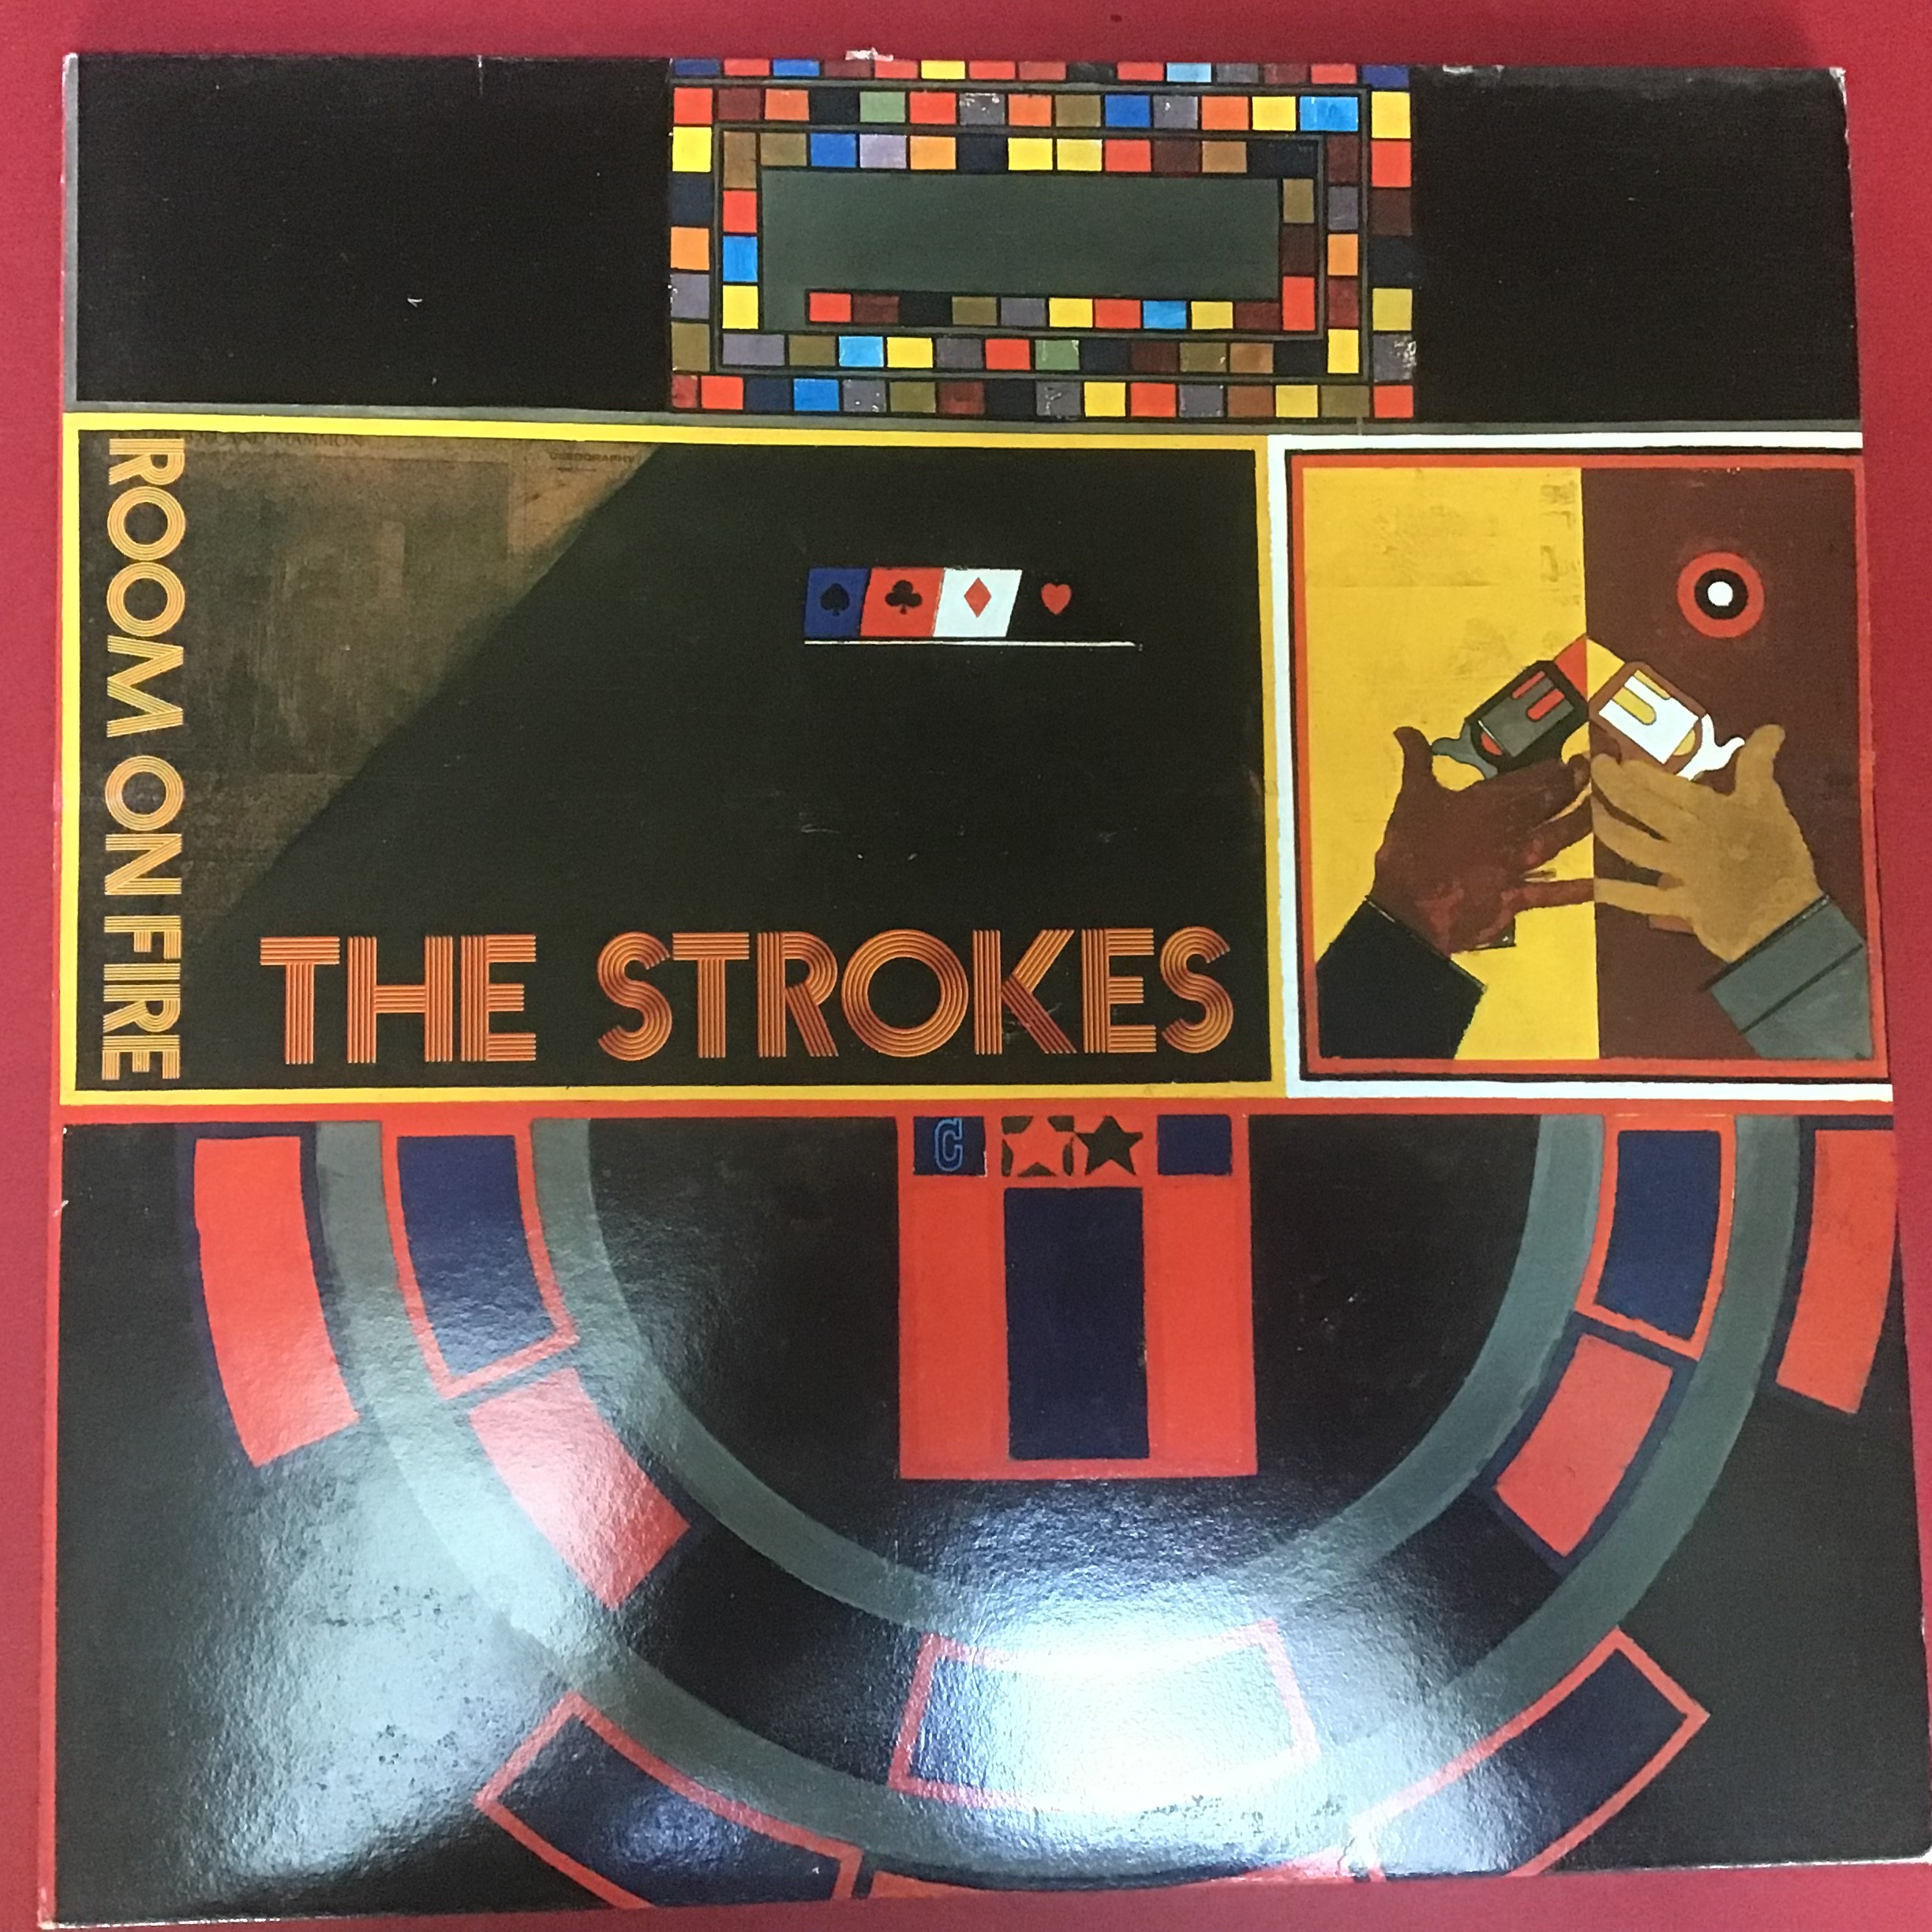 THE STROKES 'ROOM ON FIRE' LP RECORD. Found here on 180g vinyl released in 2003 and in Ex condition.